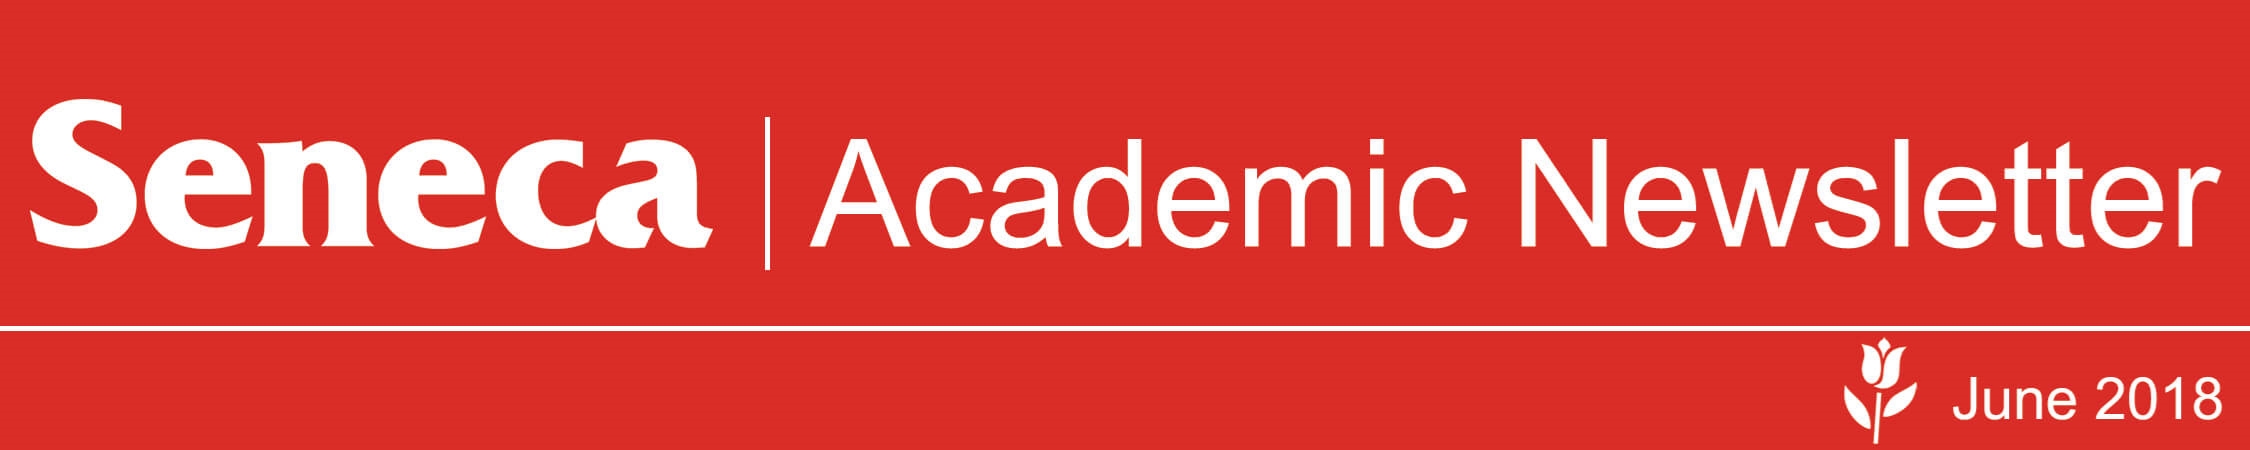 The header logo for the June 2018 issue of the Academic Newsletter